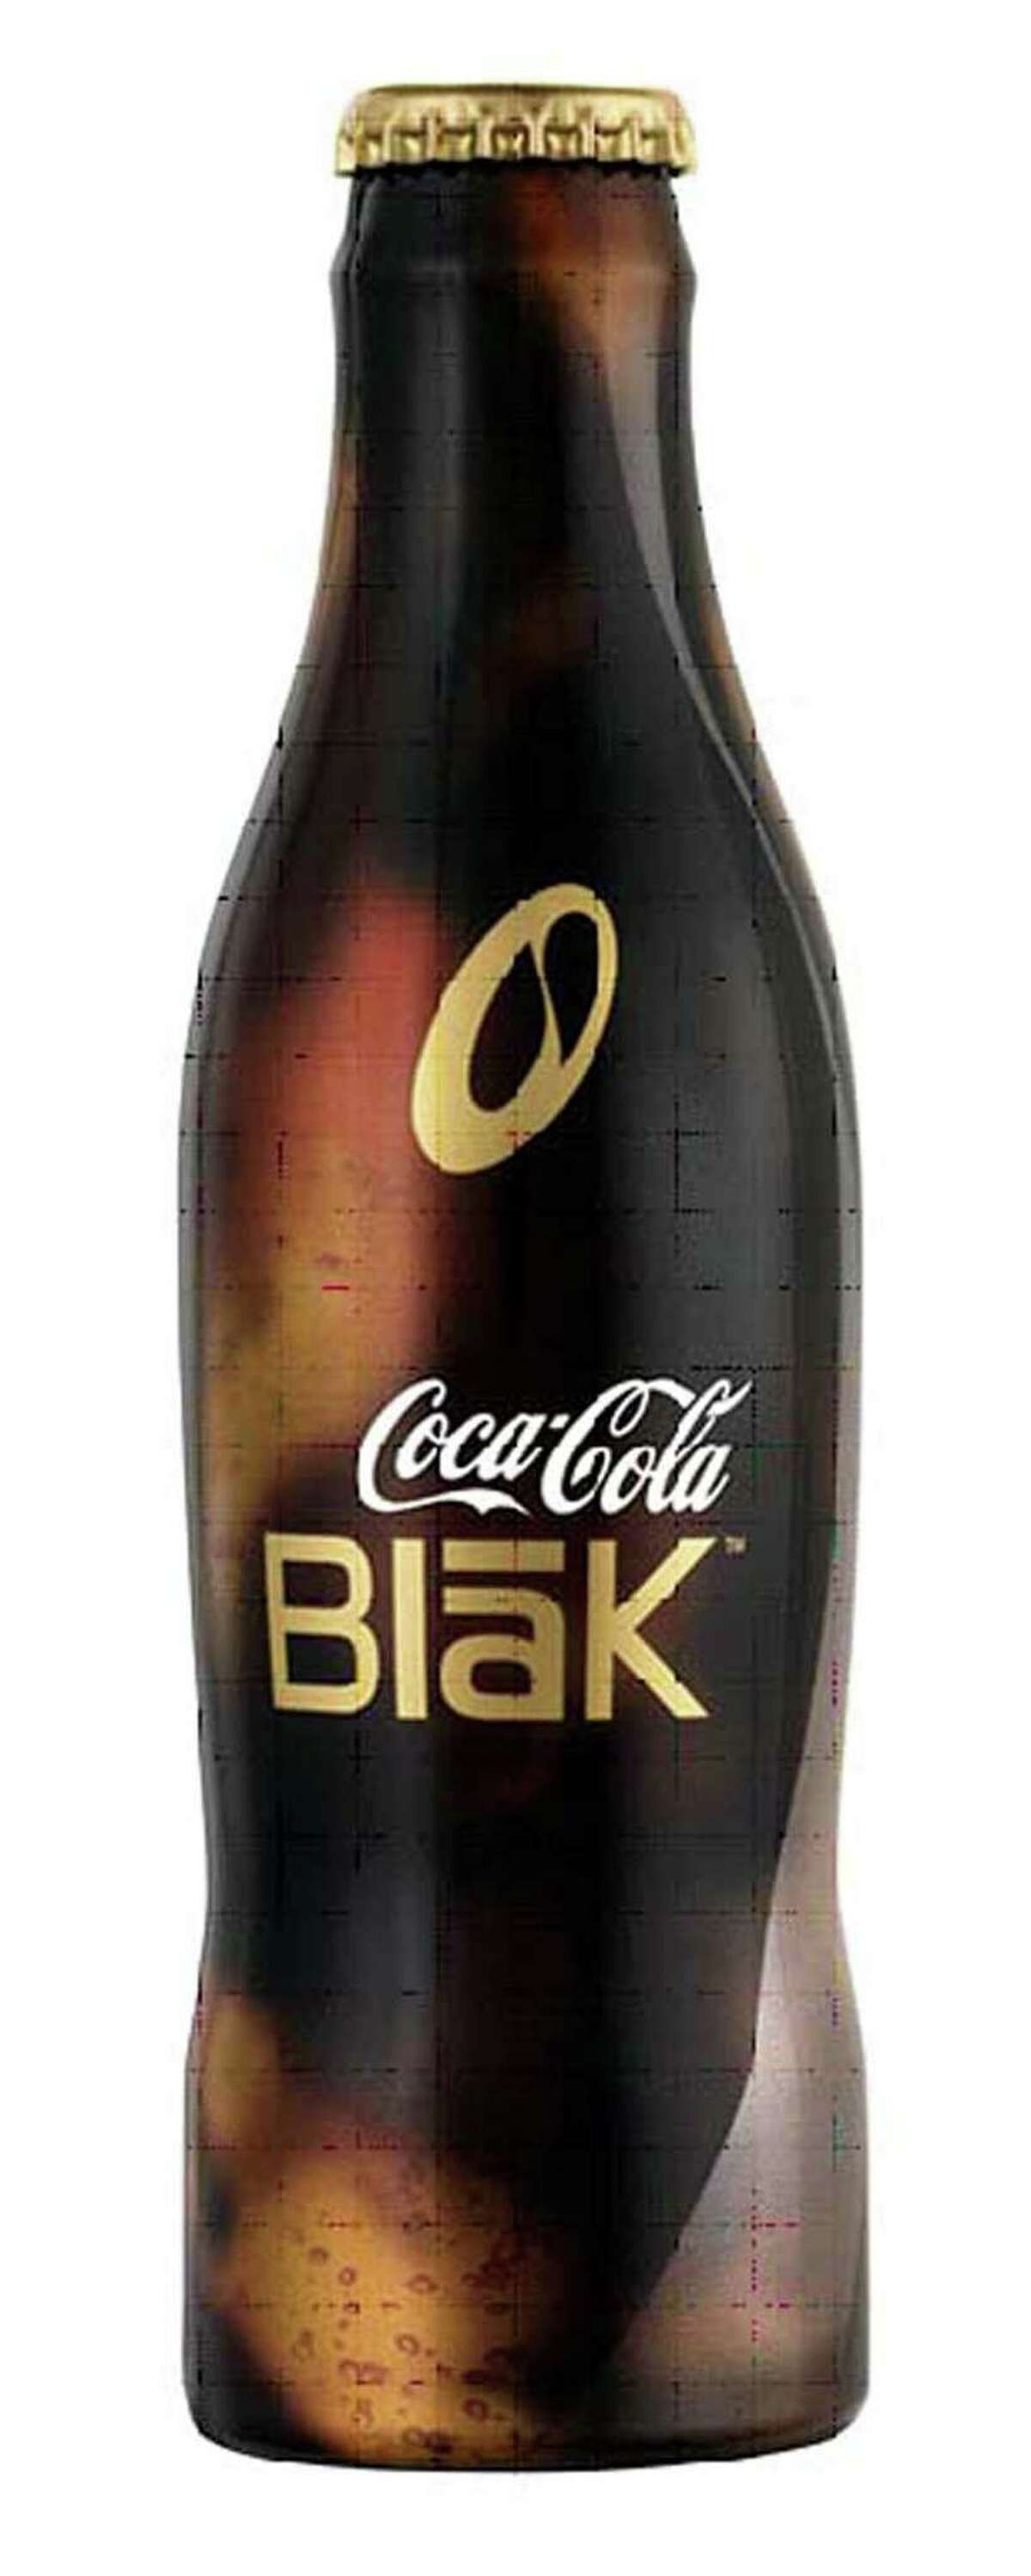 This handout photo received 08 December 2005 shows the new Coca-Cola product called Coca-Cola Blak.